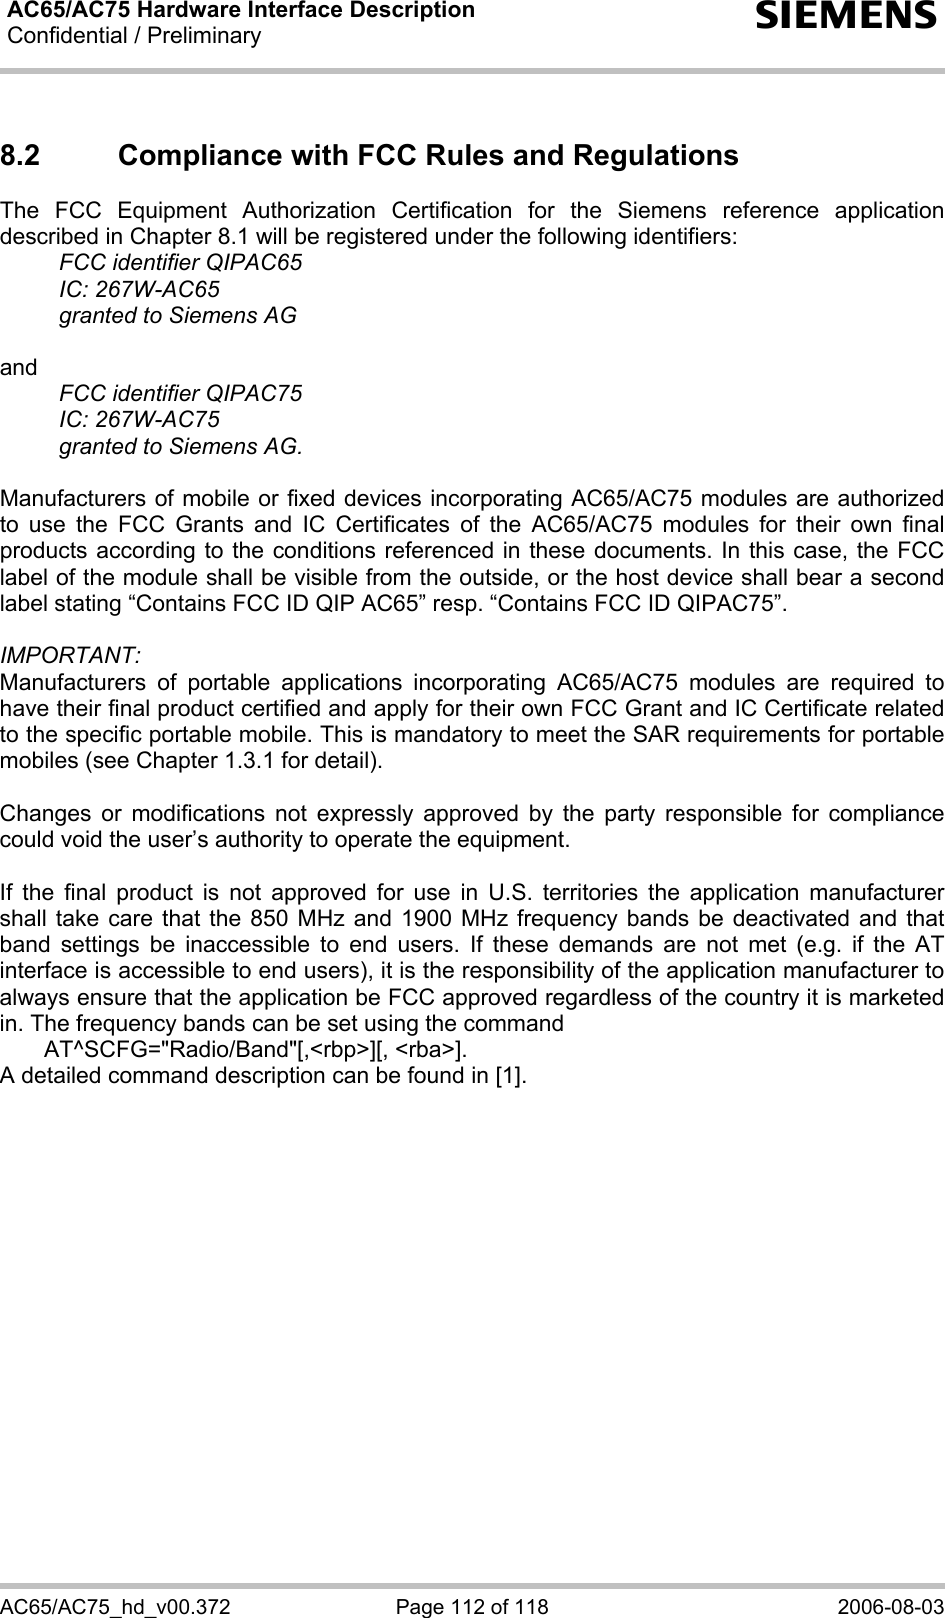 AC65/AC75 Hardware Interface Description Confidential / Preliminary  s AC65/AC75_hd_v00.372  Page 112 of 118  2006-08-03 8.2  Compliance with FCC Rules and Regulations  The FCC Equipment Authorization Certification for the Siemens reference application described in Chapter 8.1 will be registered under the following identifiers:  FCC identifier QIPAC65  IC: 267W-AC65   granted to Siemens AG  and   FCC identifier QIPAC75  IC: 267W-AC75   granted to Siemens AG.   Manufacturers of mobile or fixed devices incorporating AC65/AC75 modules are authorized to use the FCC Grants and IC Certificates of the AC65/AC75 modules for their own final products according to the conditions referenced in these documents. In this case, the FCC label of the module shall be visible from the outside, or the host device shall bear a second label stating “Contains FCC ID QIP AC65” resp. “Contains FCC ID QIPAC75”.  IMPORTANT:  Manufacturers of portable applications incorporating AC65/AC75 modules are required to have their final product certified and apply for their own FCC Grant and IC Certificate related to the specific portable mobile. This is mandatory to meet the SAR requirements for portable mobiles (see Chapter 1.3.1 for detail).  Changes or modifications not expressly approved by the party responsible for compliance could void the user’s authority to operate the equipment.  If the final product is not approved for use in U.S. territories the application manufacturer shall take care that the 850 MHz and 1900 MHz frequency bands be deactivated and that band settings be inaccessible to end users. If these demands are not met (e.g. if the AT interface is accessible to end users), it is the responsibility of the application manufacturer to always ensure that the application be FCC approved regardless of the country it is marketed in. The frequency bands can be set using the command    AT^SCFG=&quot;Radio/Band&quot;[,&lt;rbp&gt;][, &lt;rba&gt;].  A detailed command description can be found in [1].  